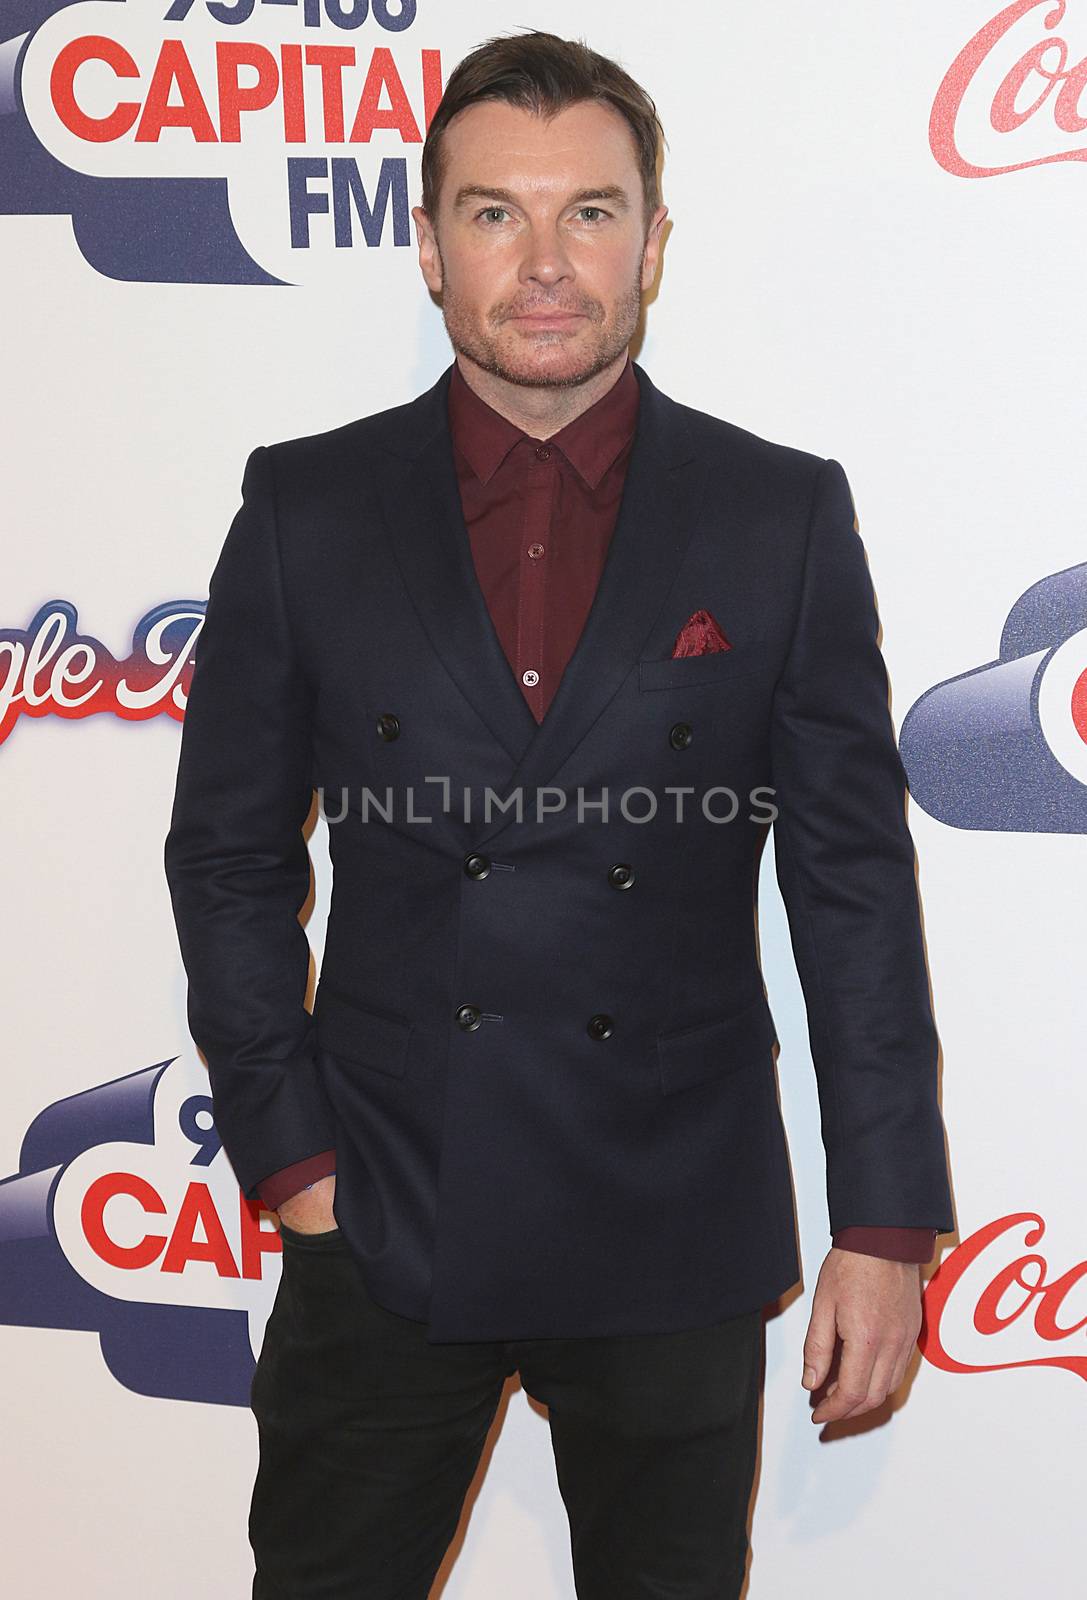 UNITED KINGDOM, London: Greg Burns attends the Capital FM Jingle Bell Ball at 02 Arena in London on December 6, 2015. 